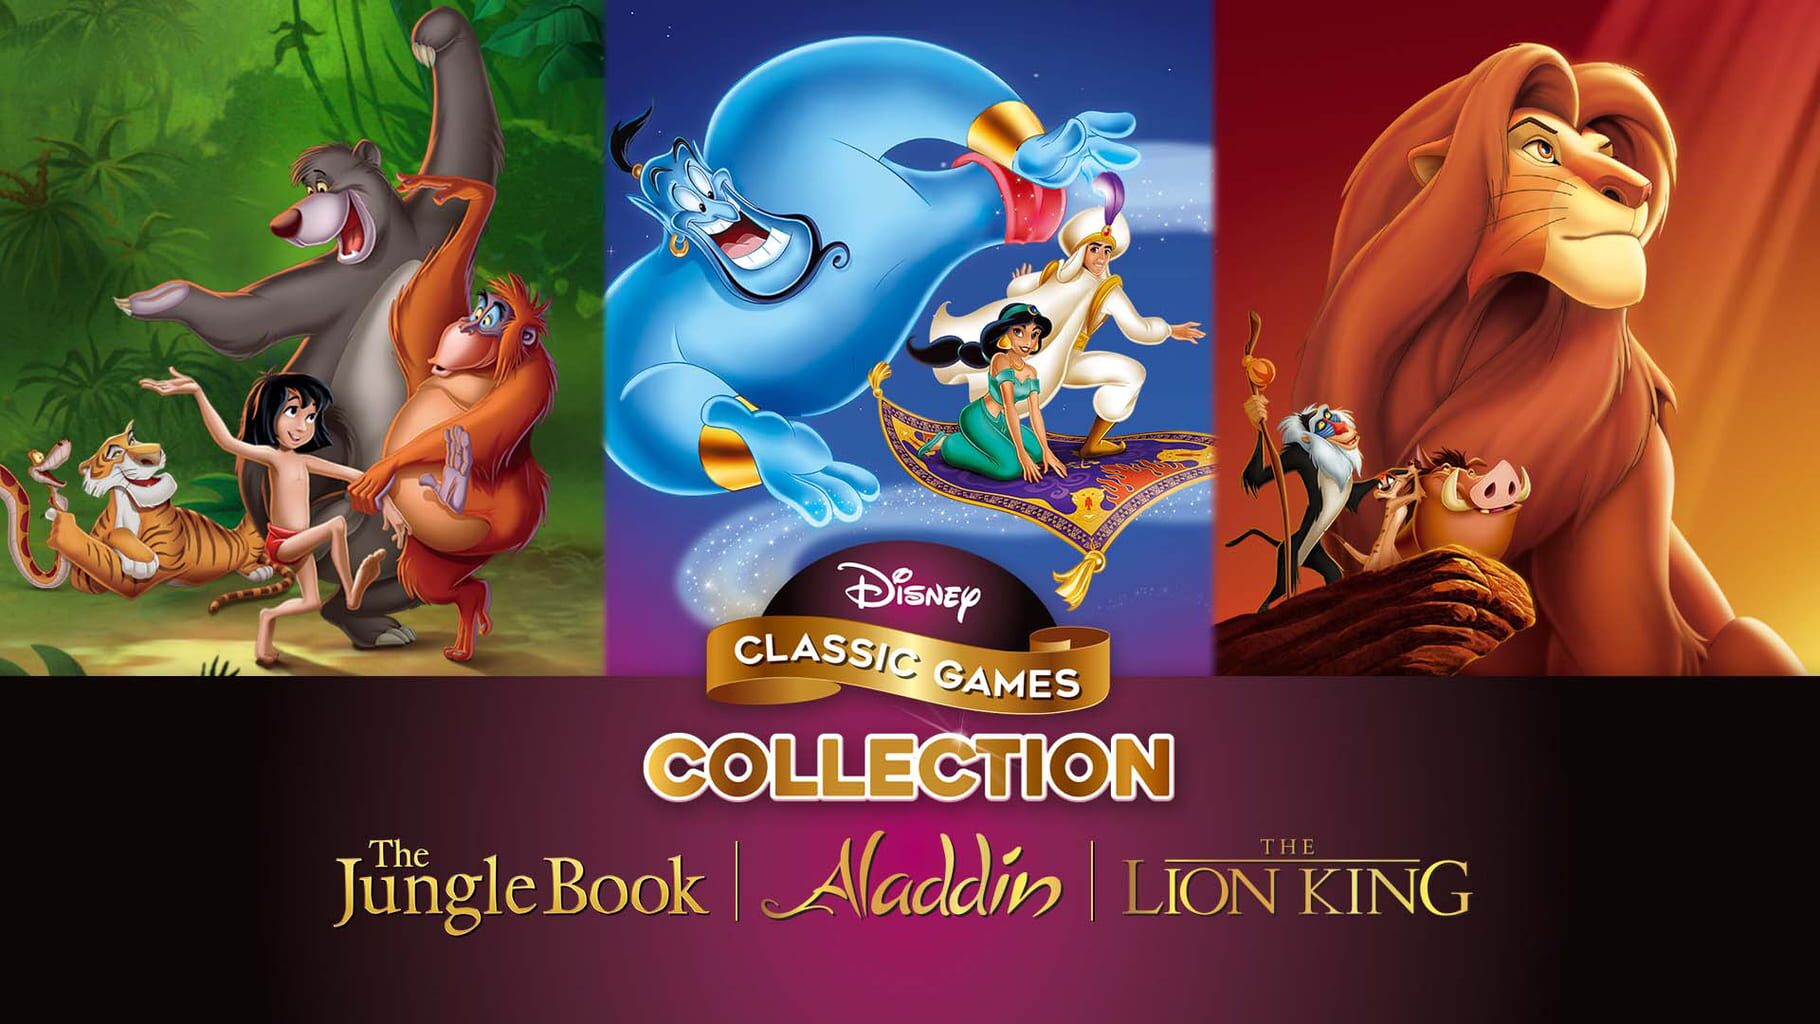 Arte - Disney Classic Games: Aladdin and The Lion King - The Jungle Book and More Aladdin Pack